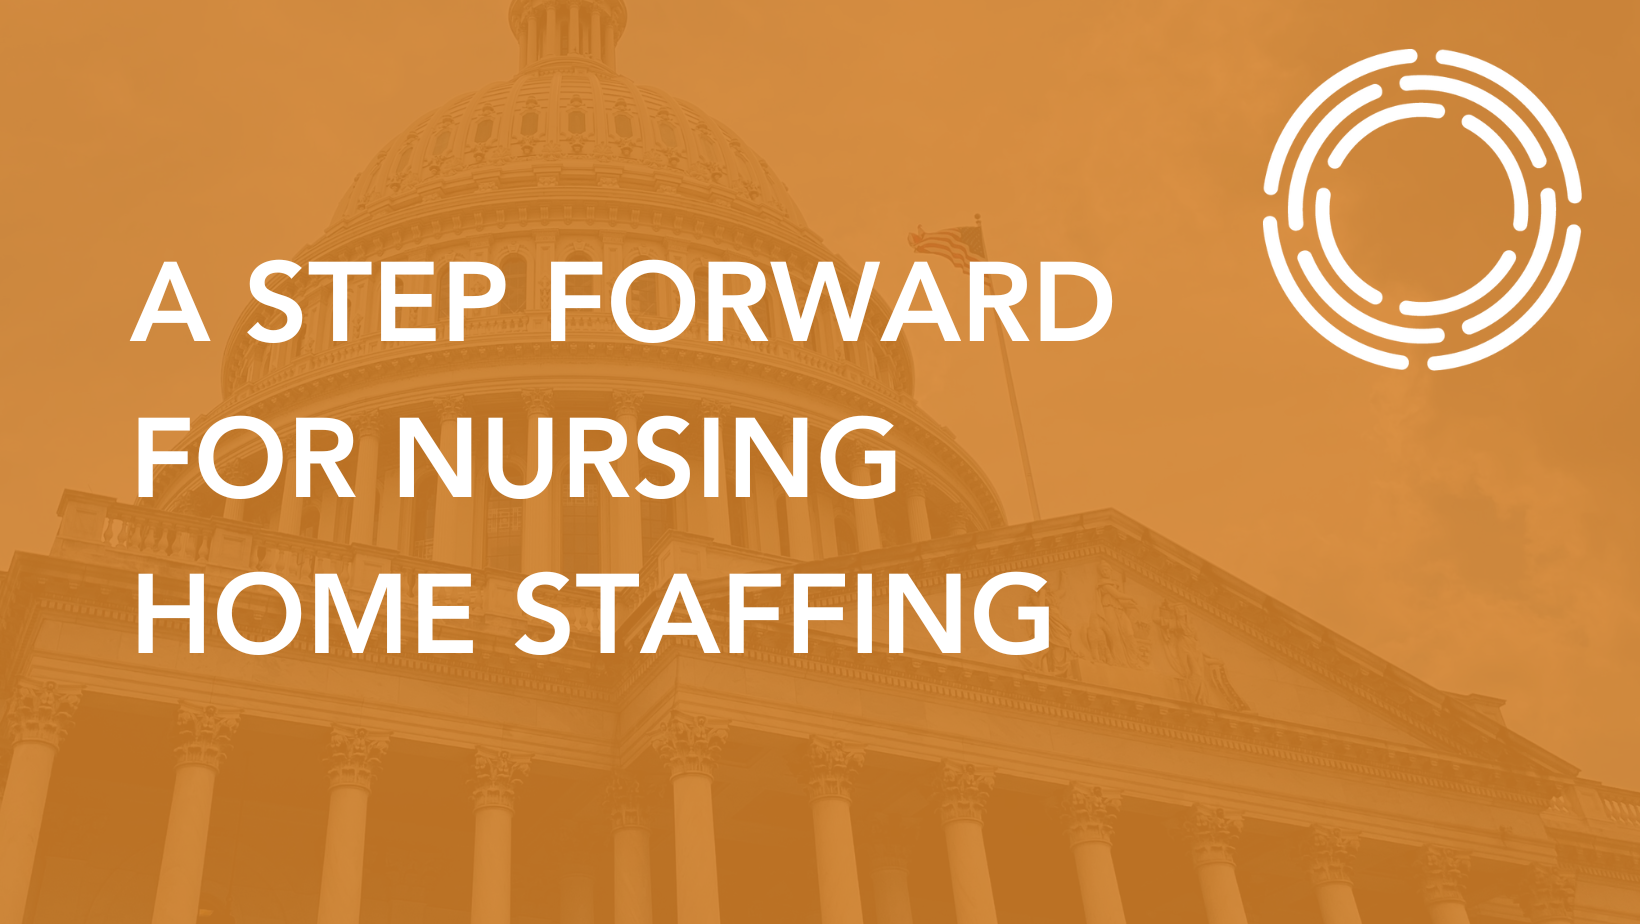 Nursing Home Staffing Standards are Finally Becoming a Reality